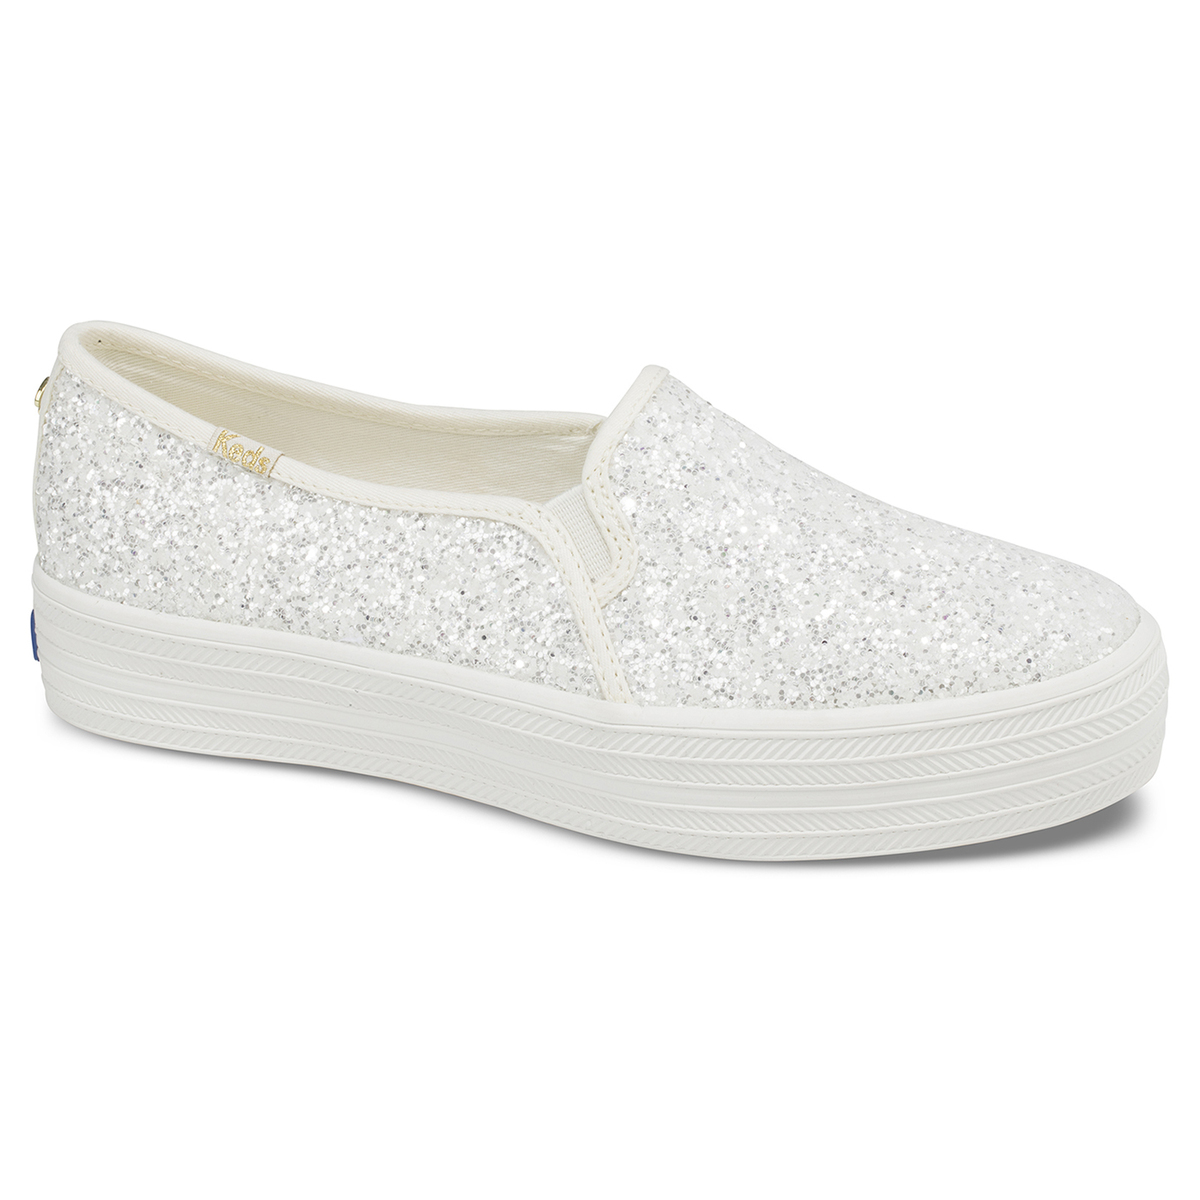 These Bejeweled Bridal Sneakers Are Reason Enough To Get Married